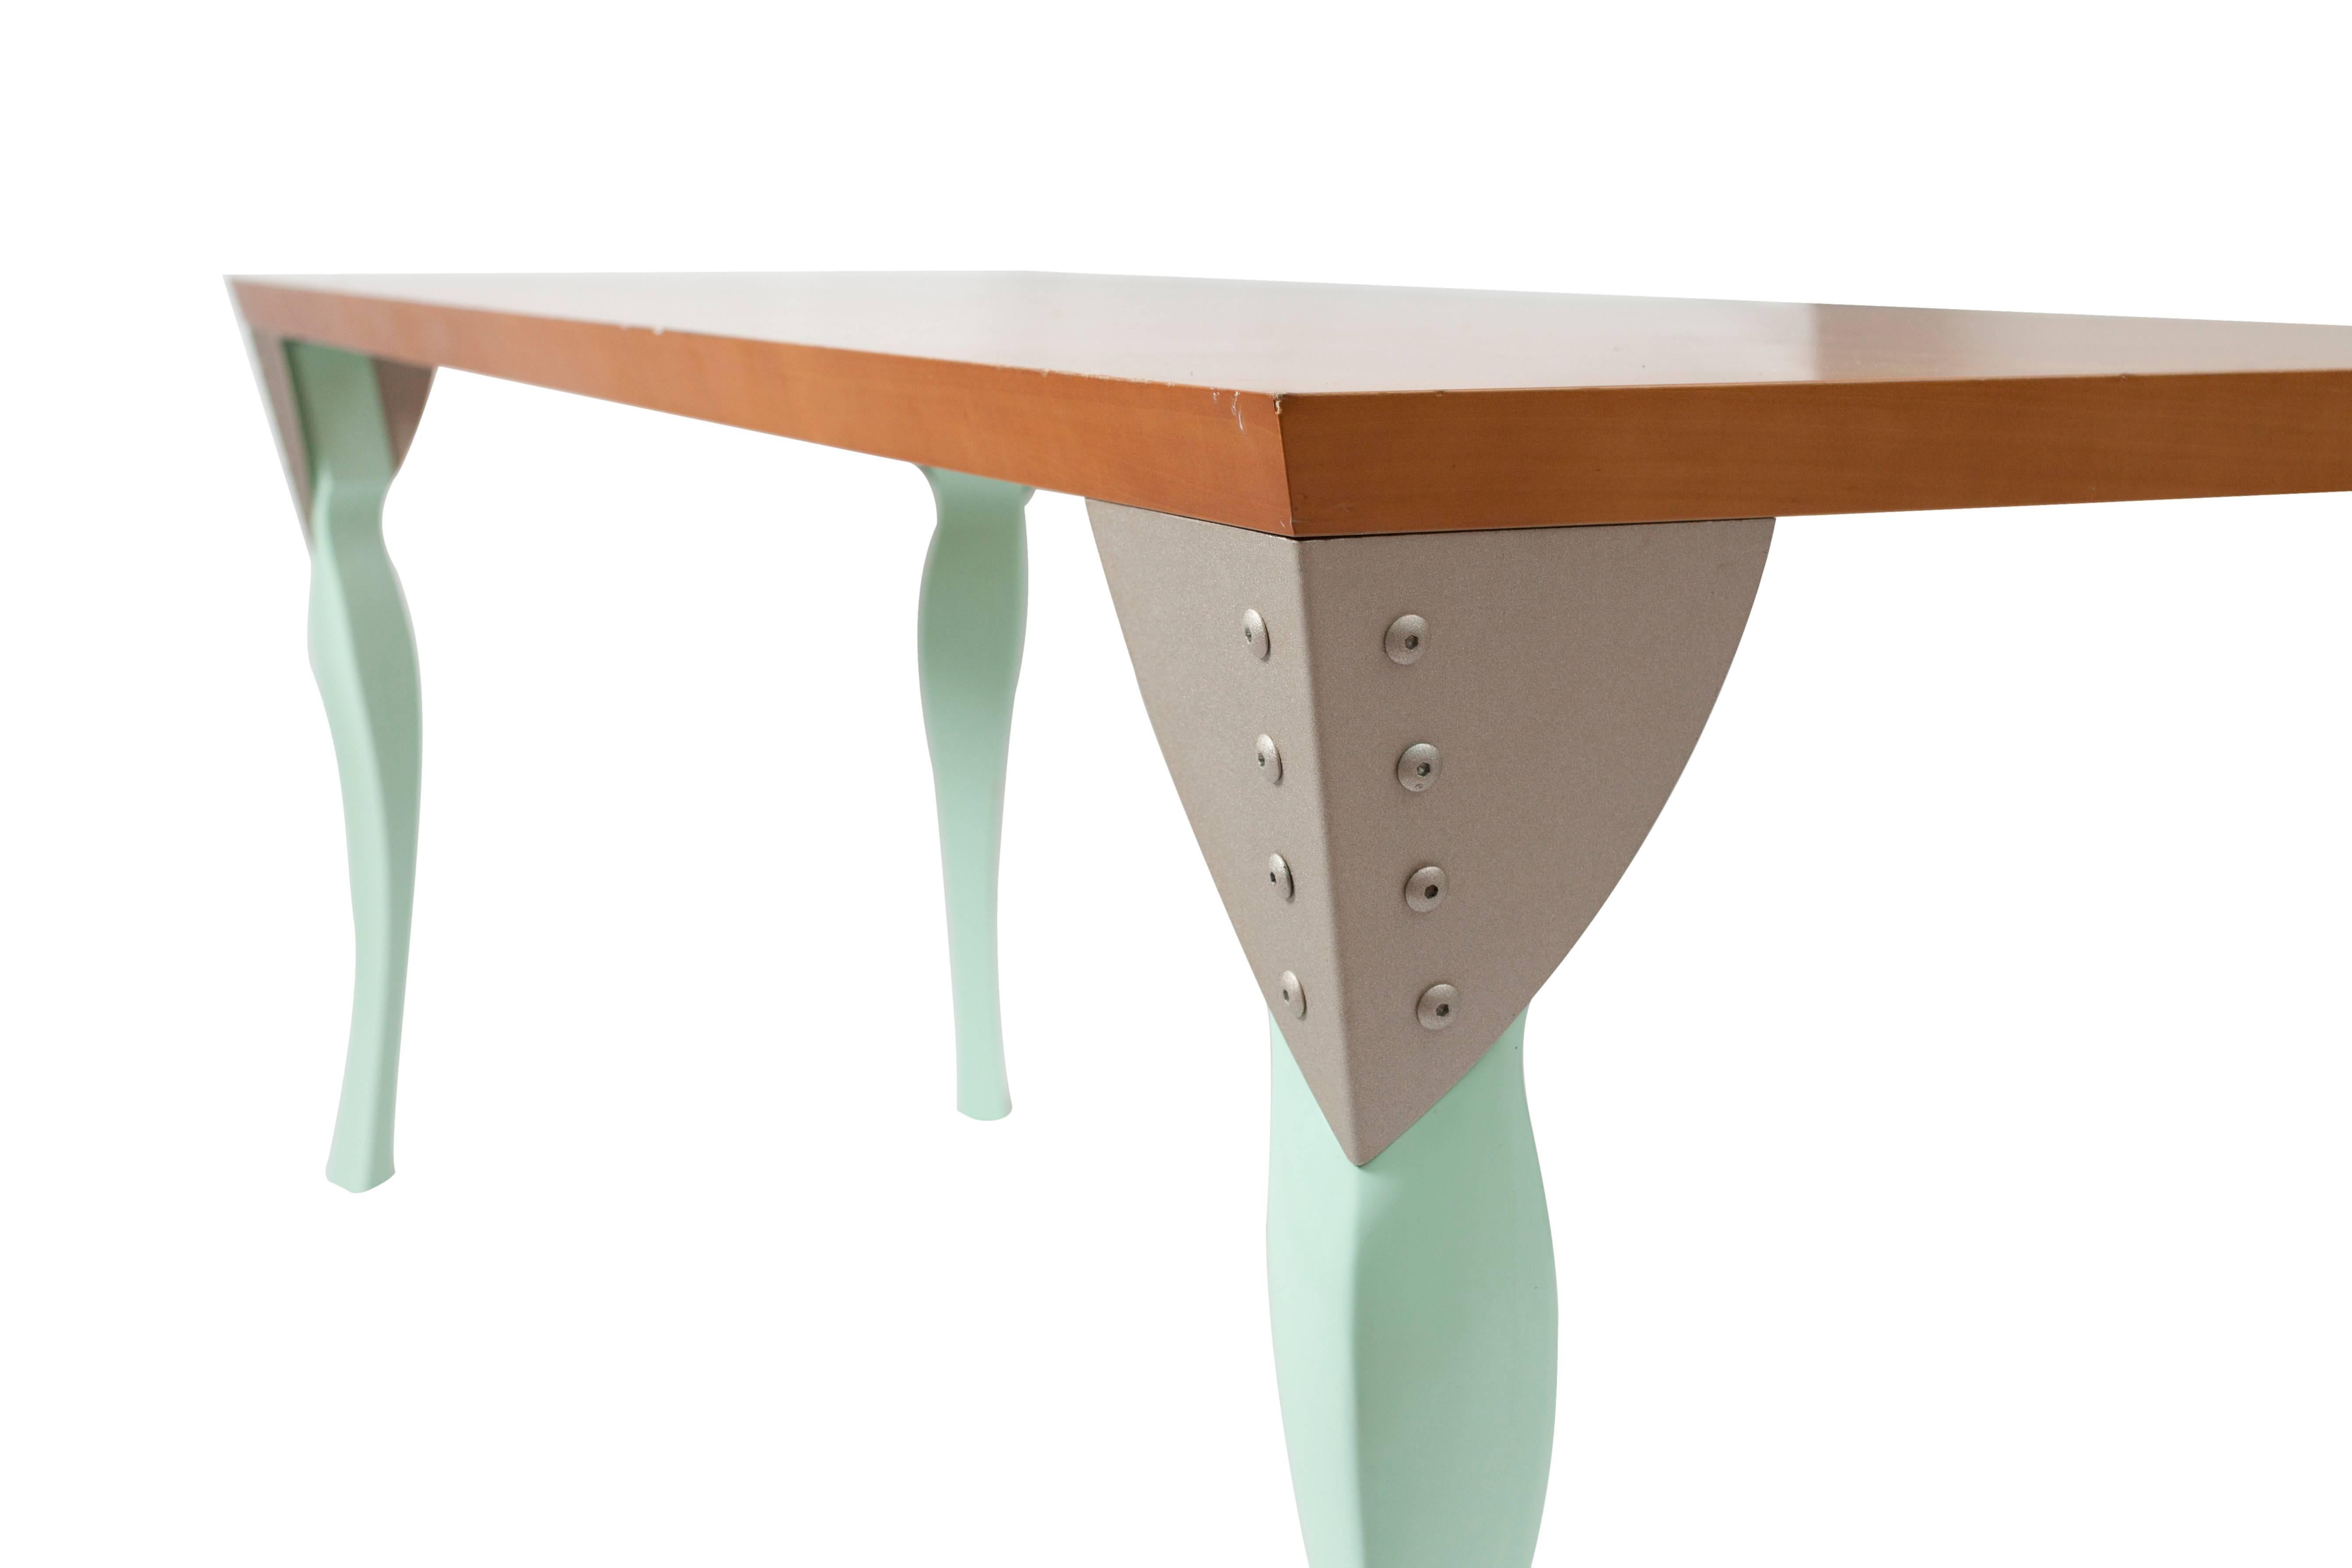 Czech Dining Table in Postmodern Style designed by Borek Sipek for Scarabas